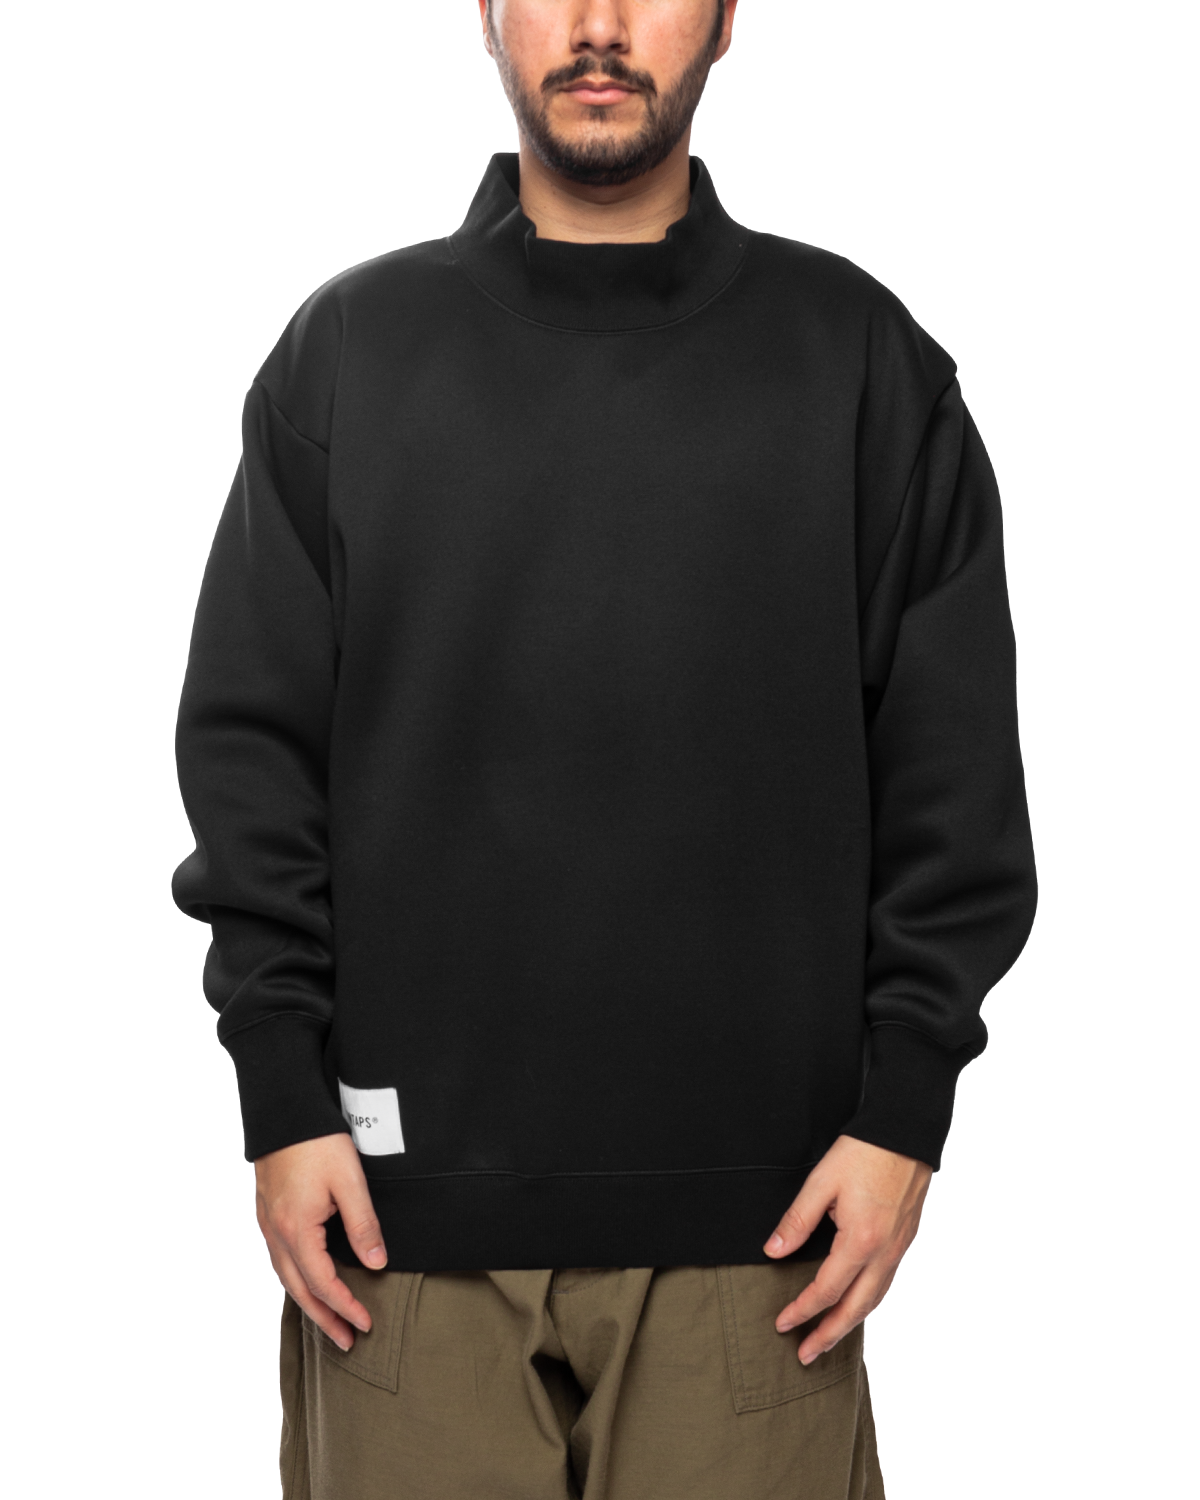 WTAPS FORTLESS SWEATER COTTON GRAY L-